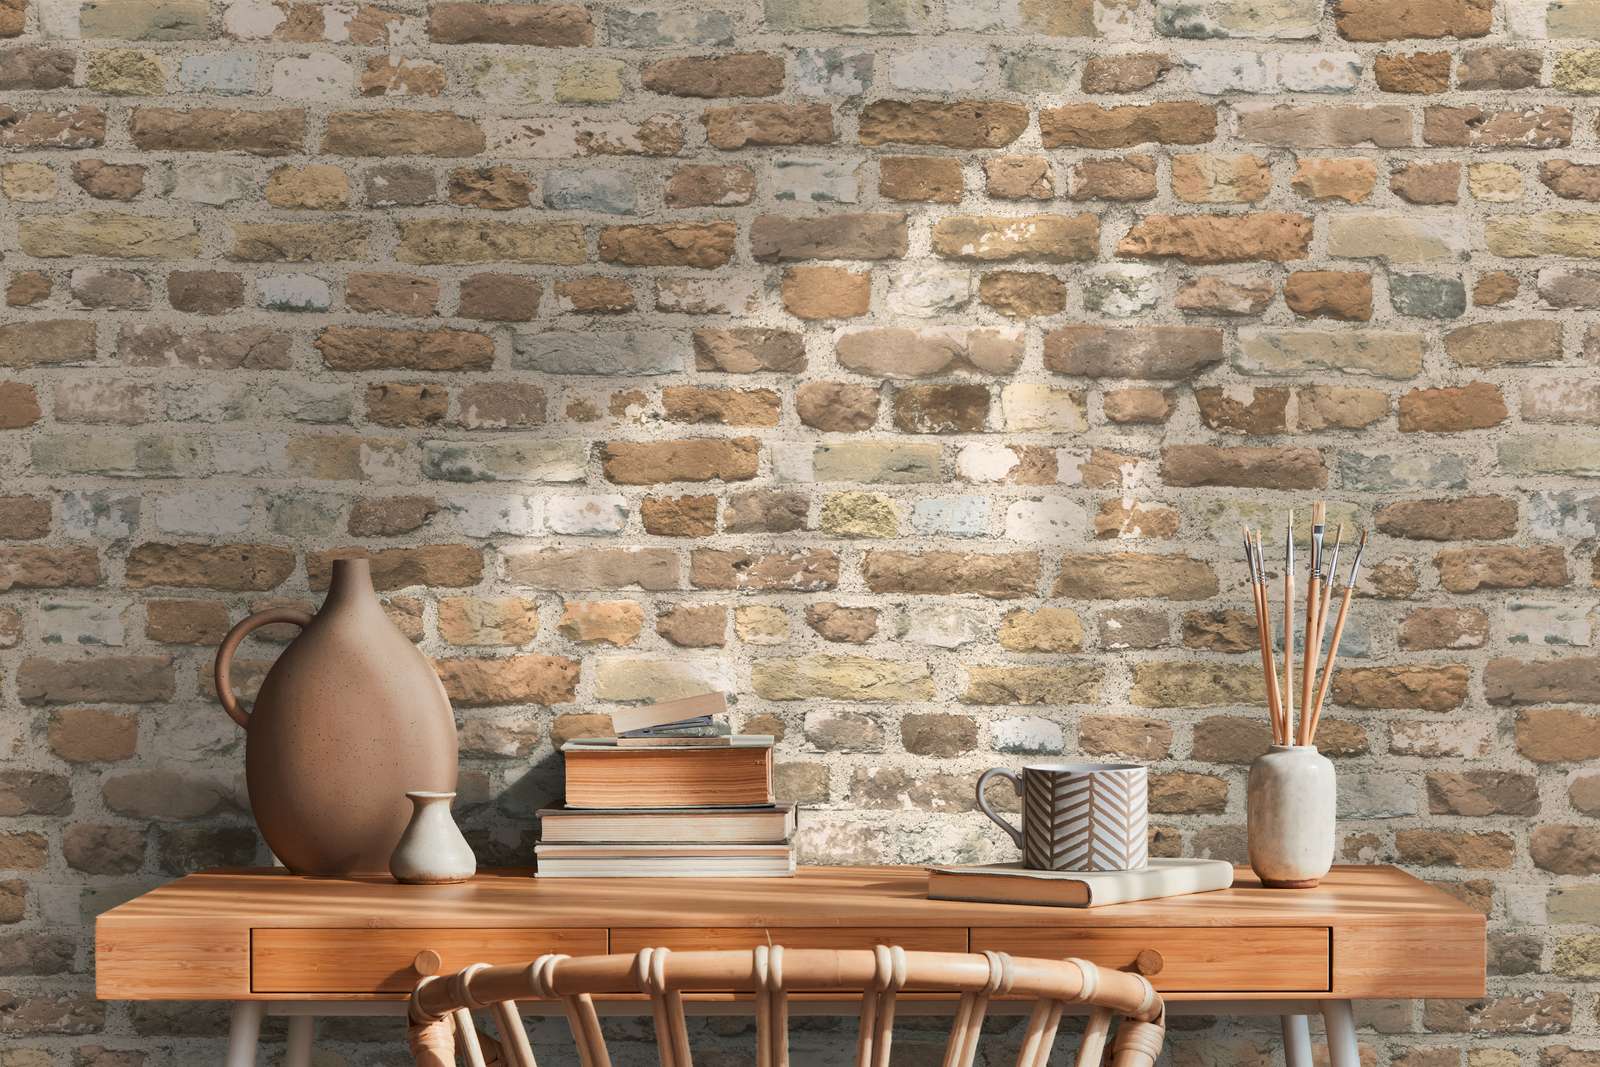             Brown stone wallpaper with brick wall look - brown, grey
        